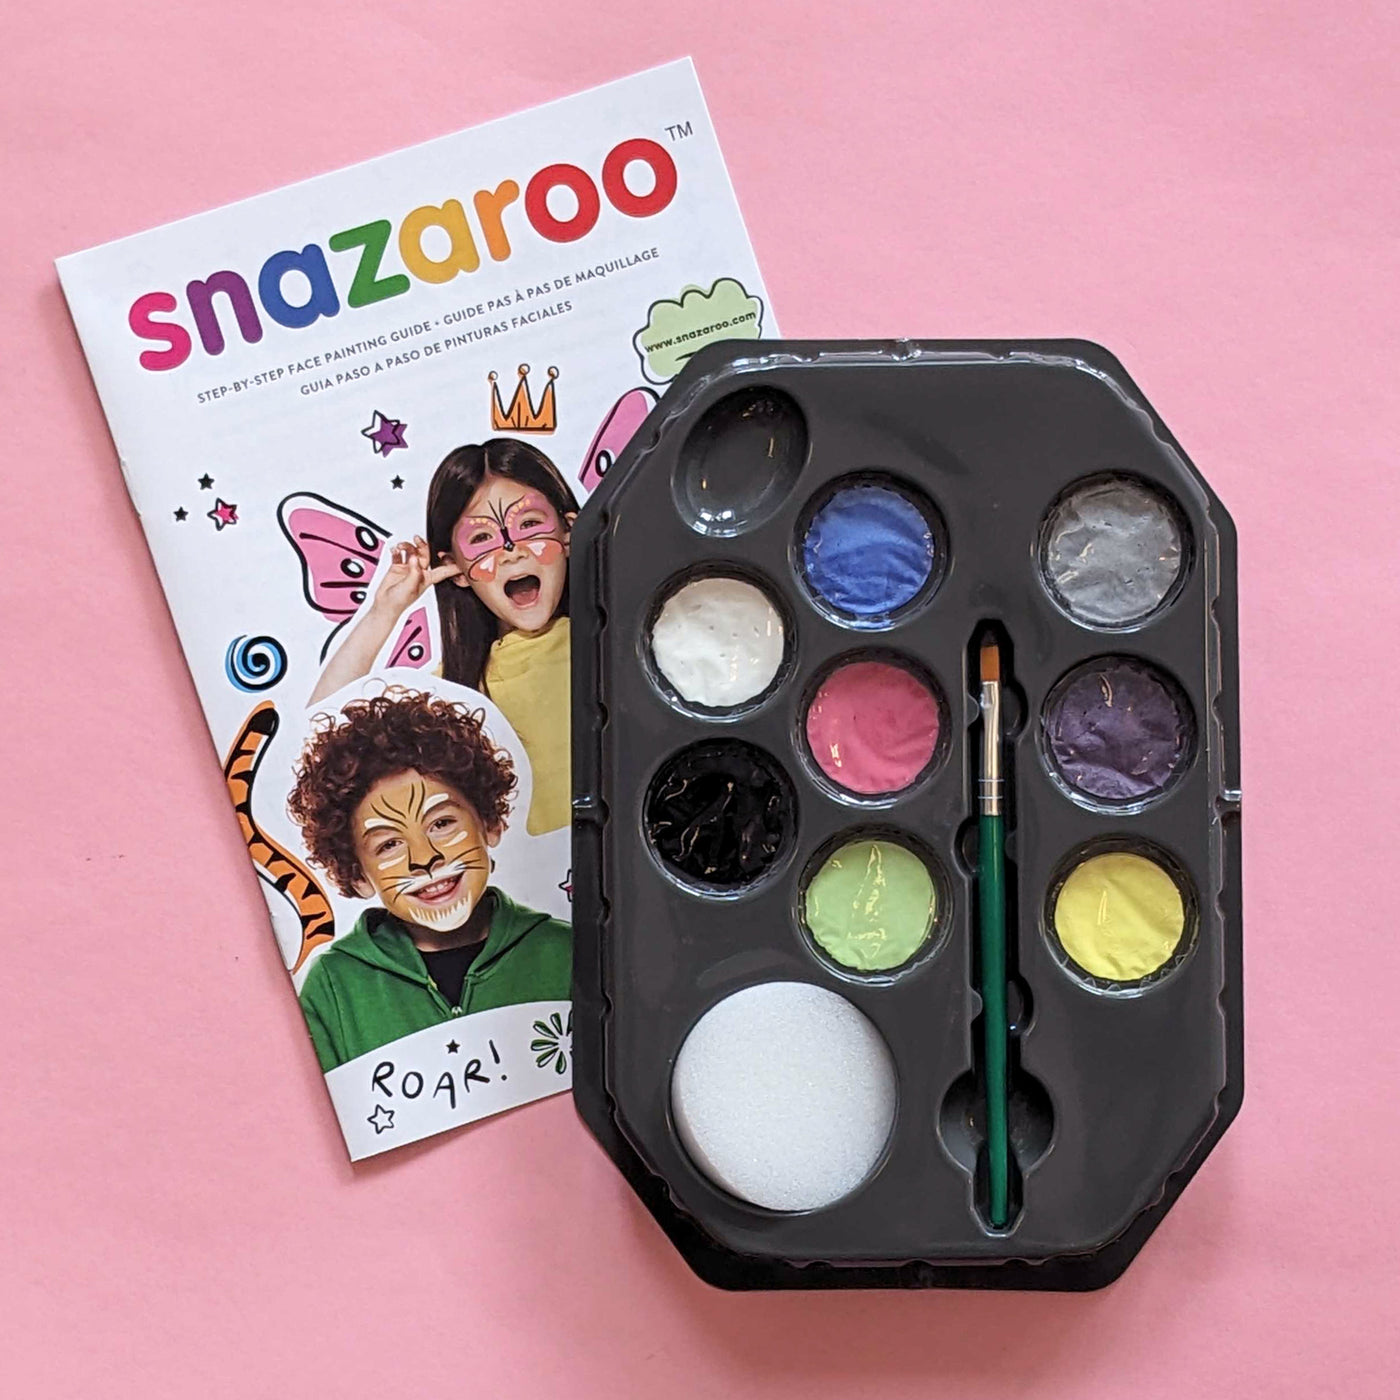 Face painting kit in fantasy colors contains 2ml white, black, pale yellow, fuchsia pink, pale green, electric silver, sparkle blue and sparkle lilac with sponge and guide